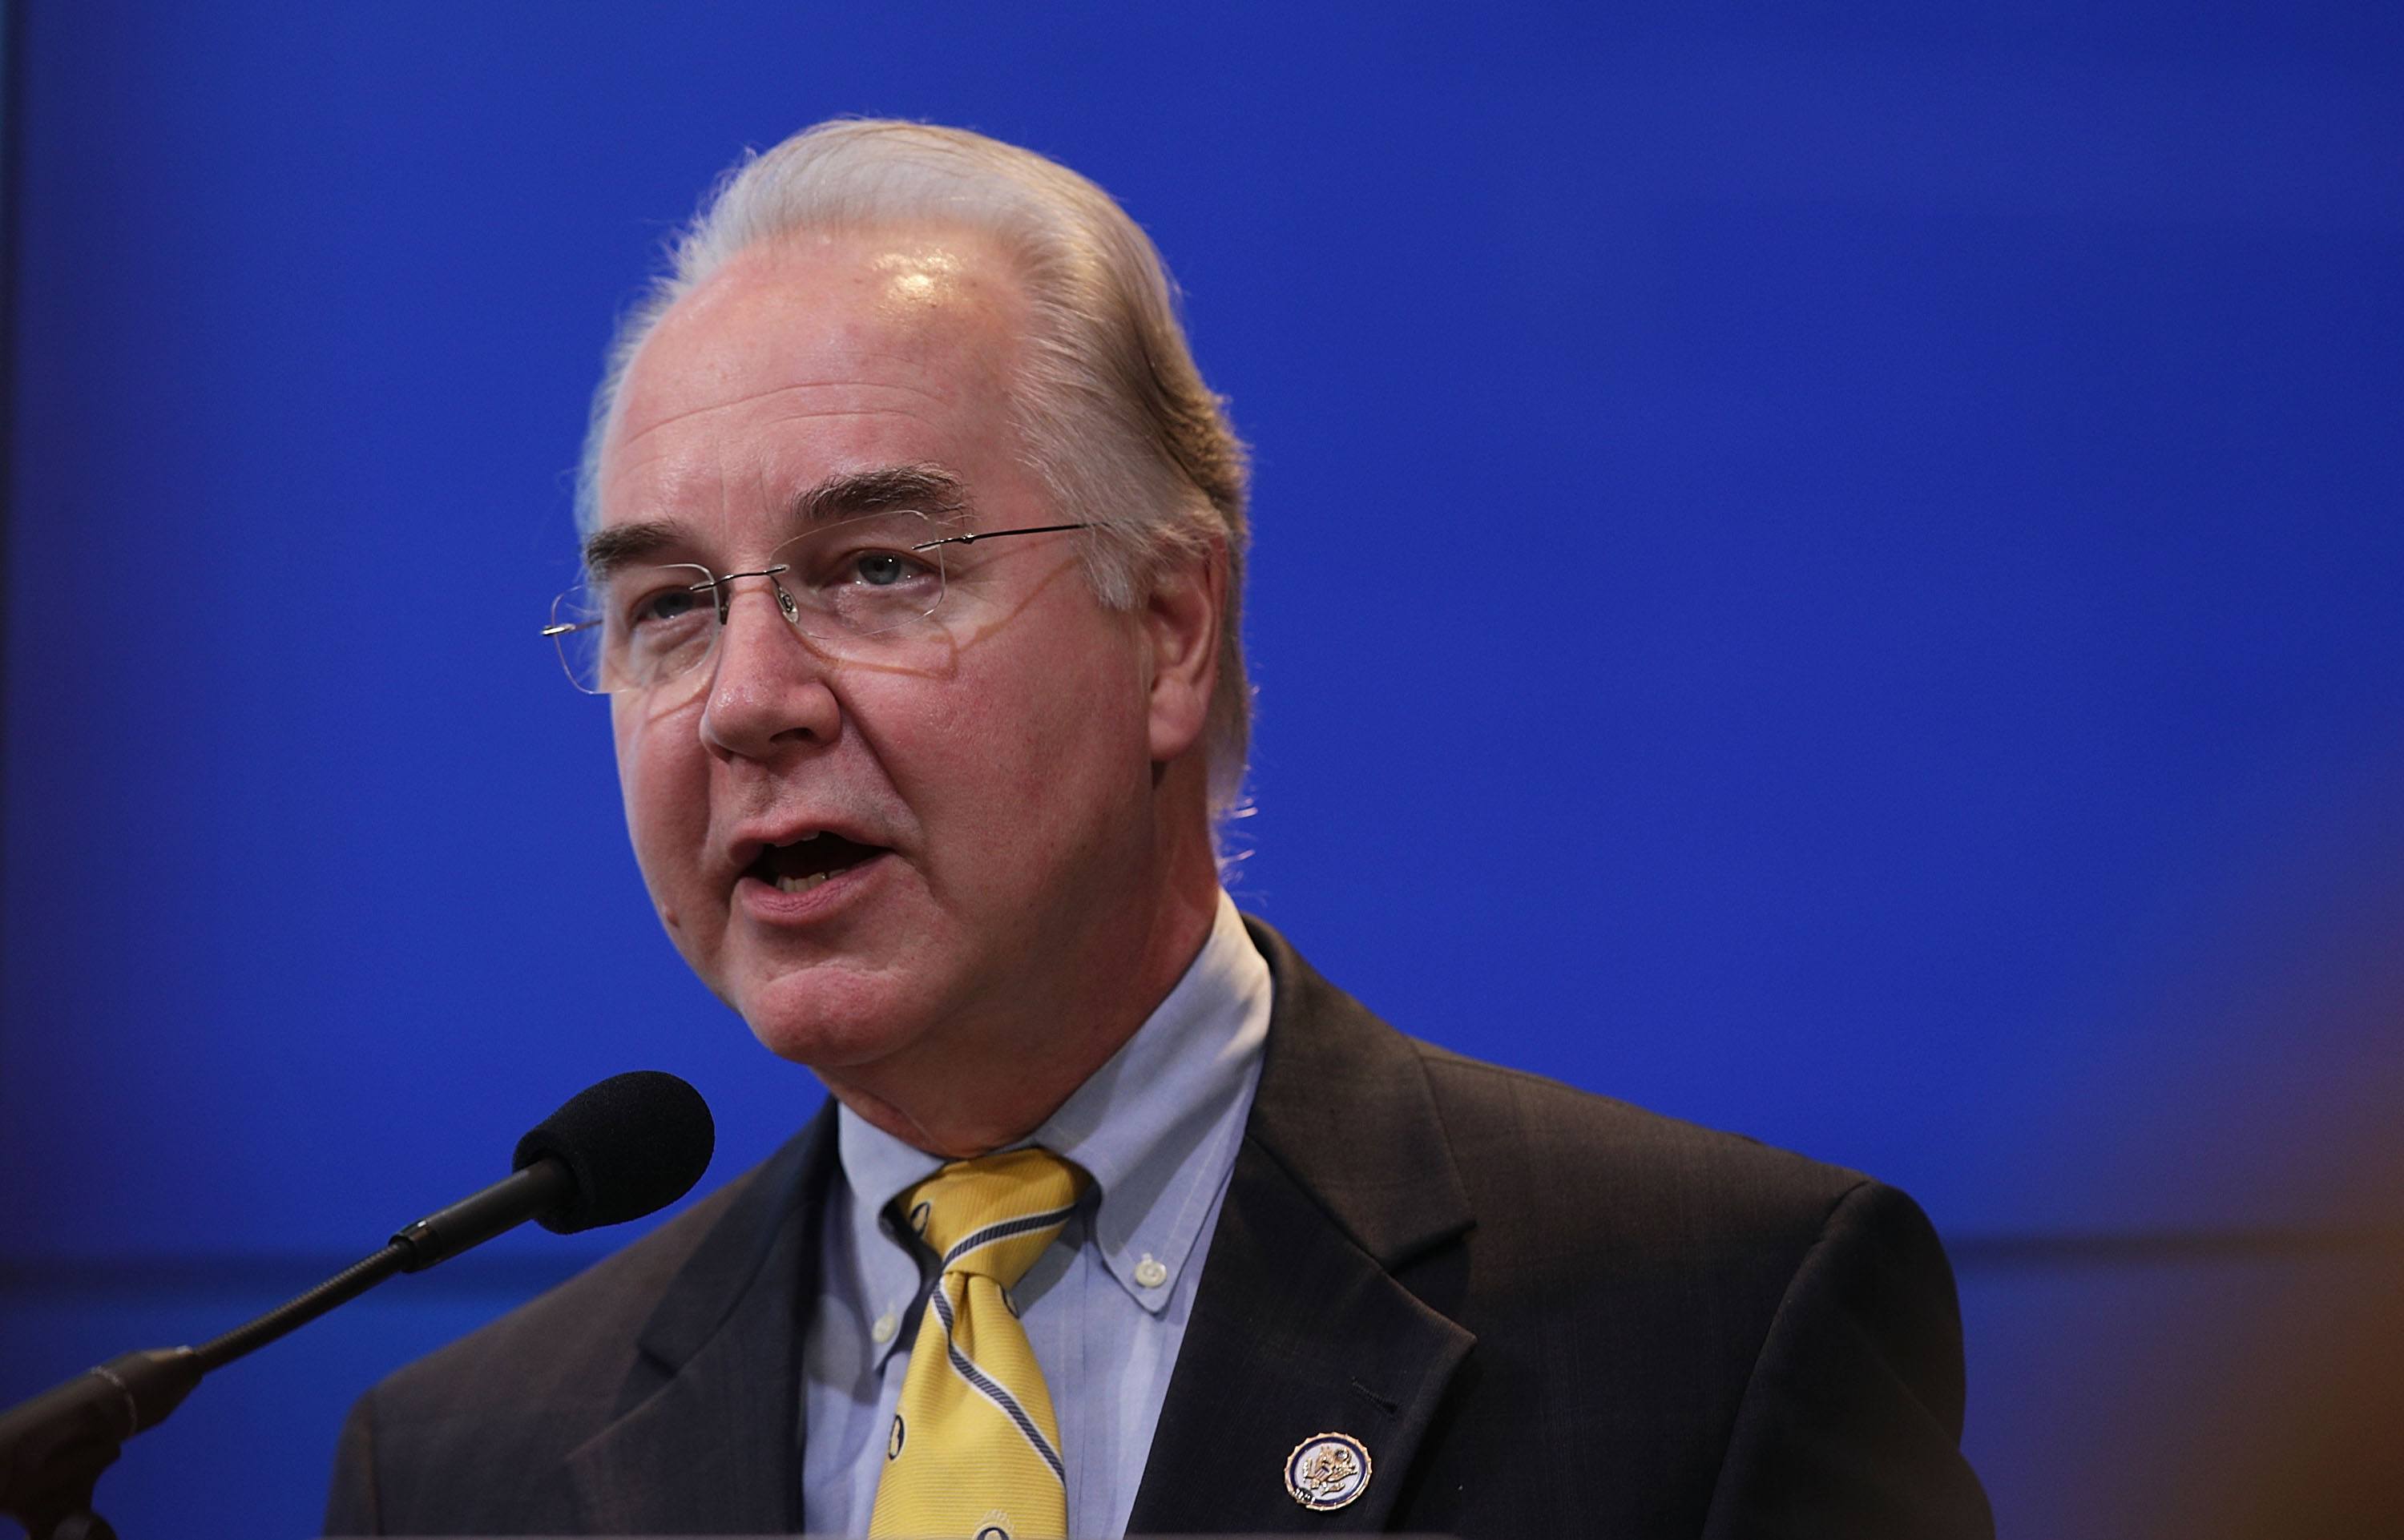 Trump's Pick For Health Secretary Rep. Tom Price (R-GA) Speaks At The Brookings Institution On The Federal Budget Process